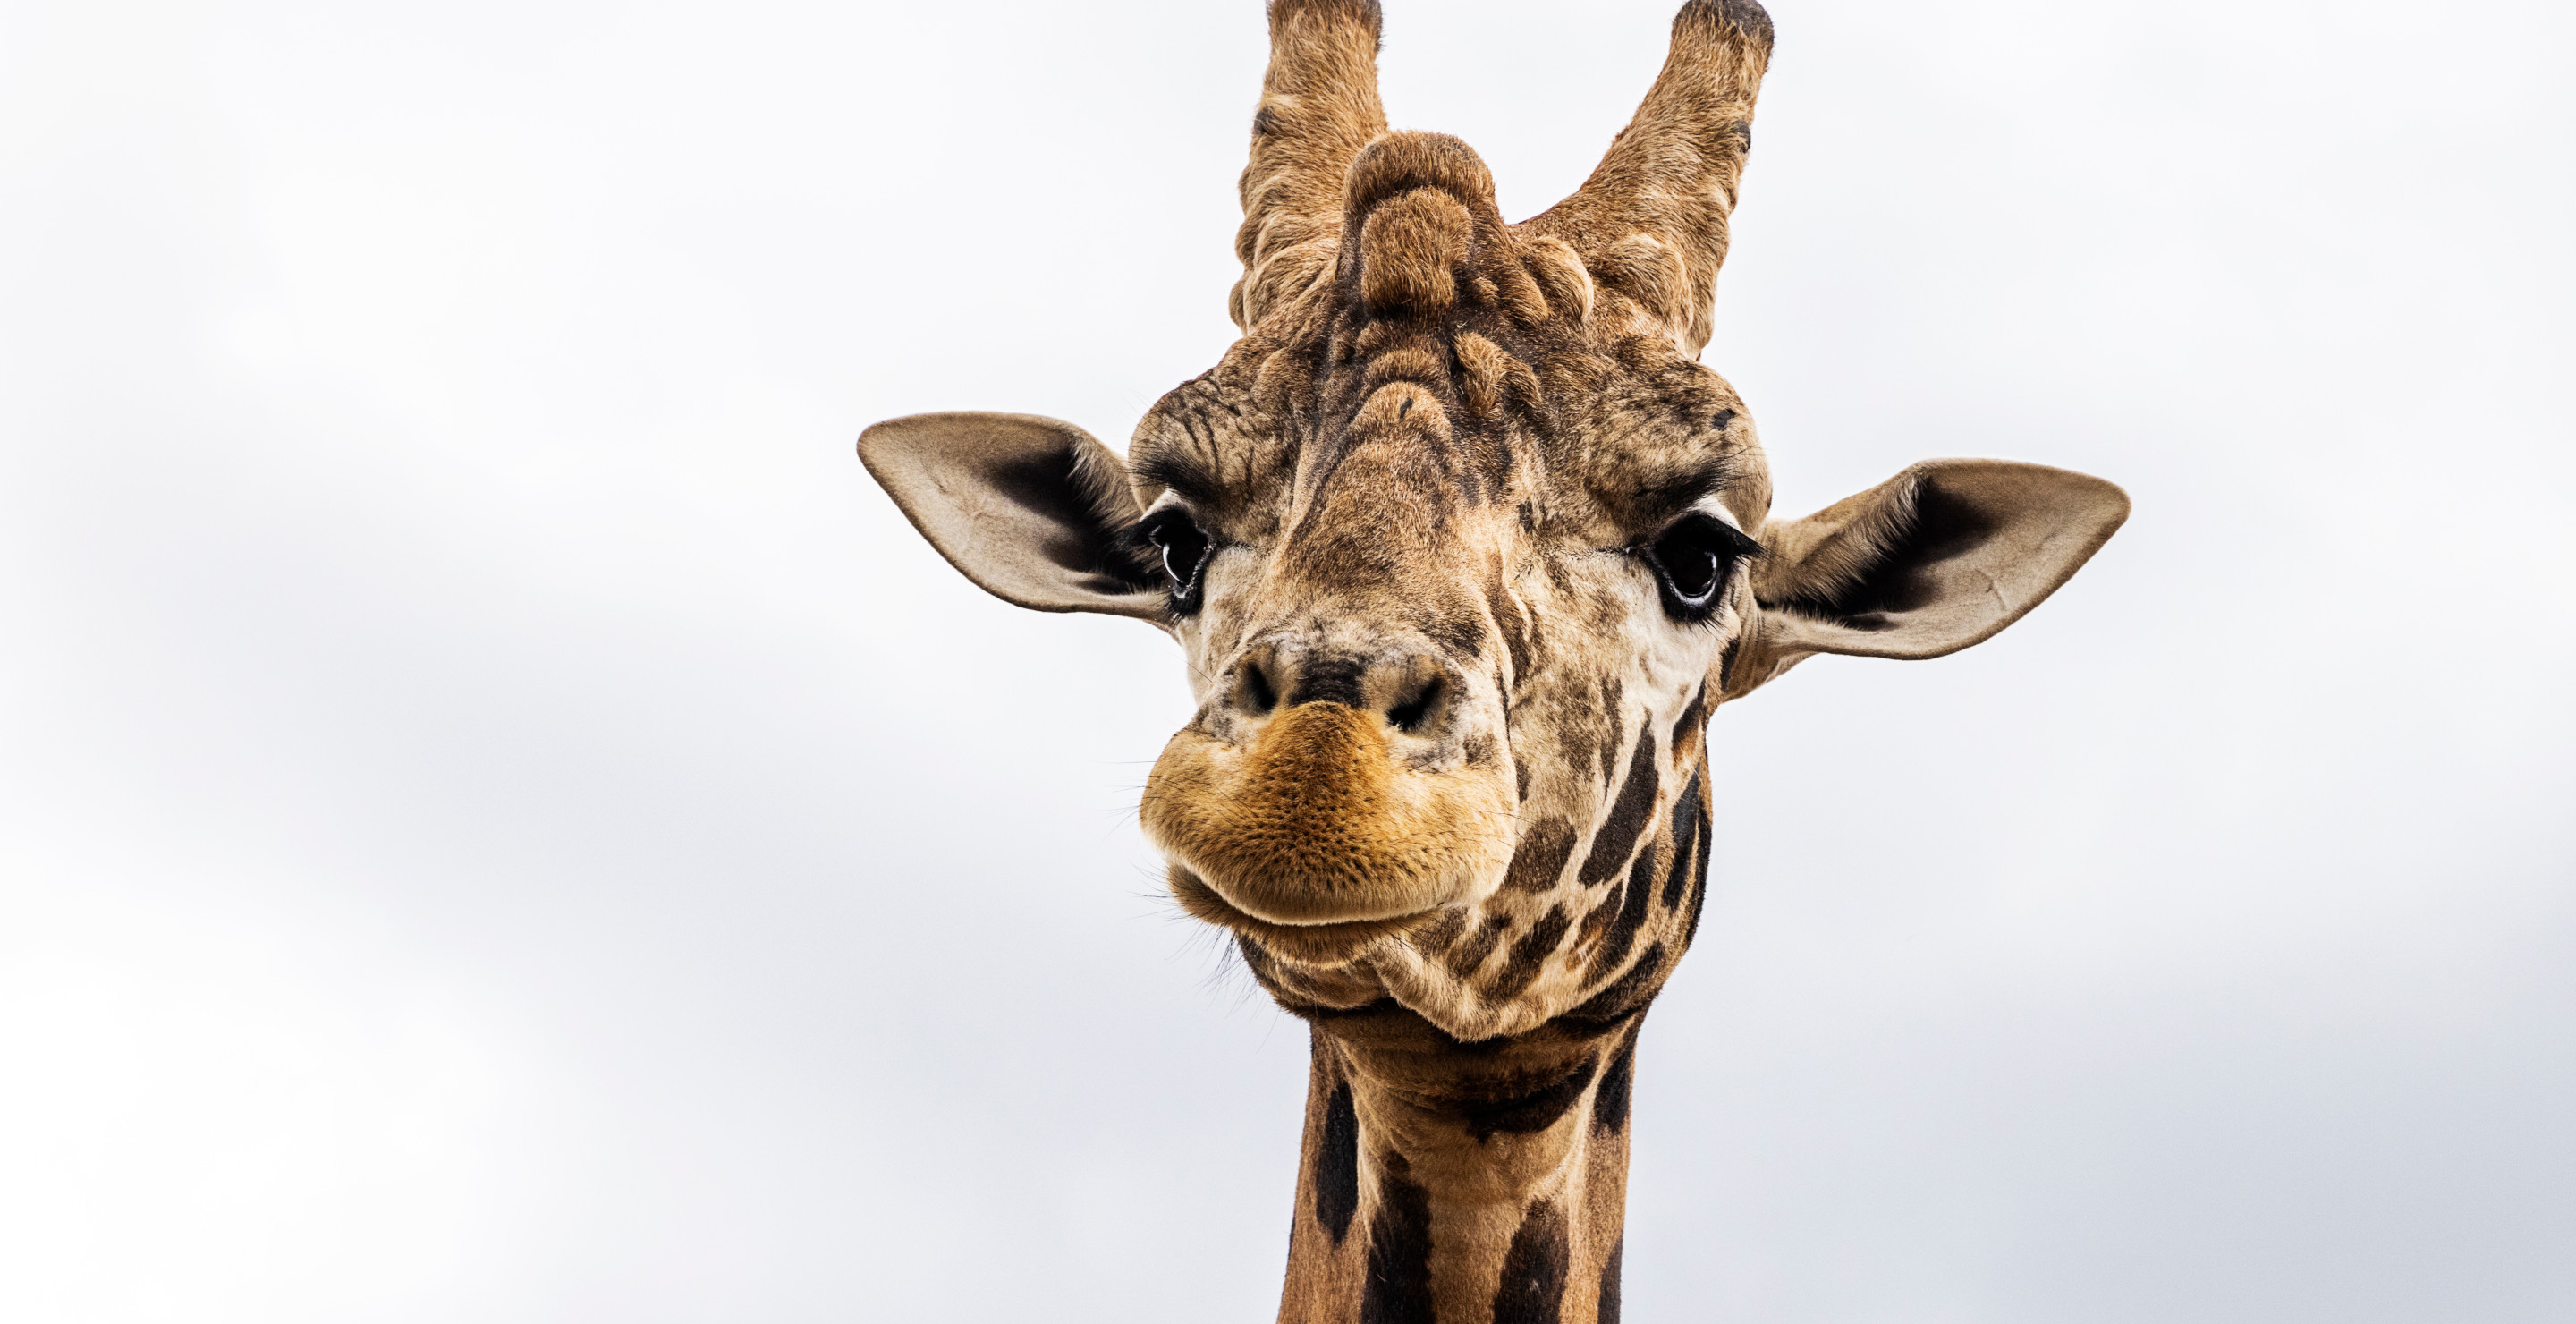 Giraffe Snatches Toddler From Vehicle In Terrifying Moment